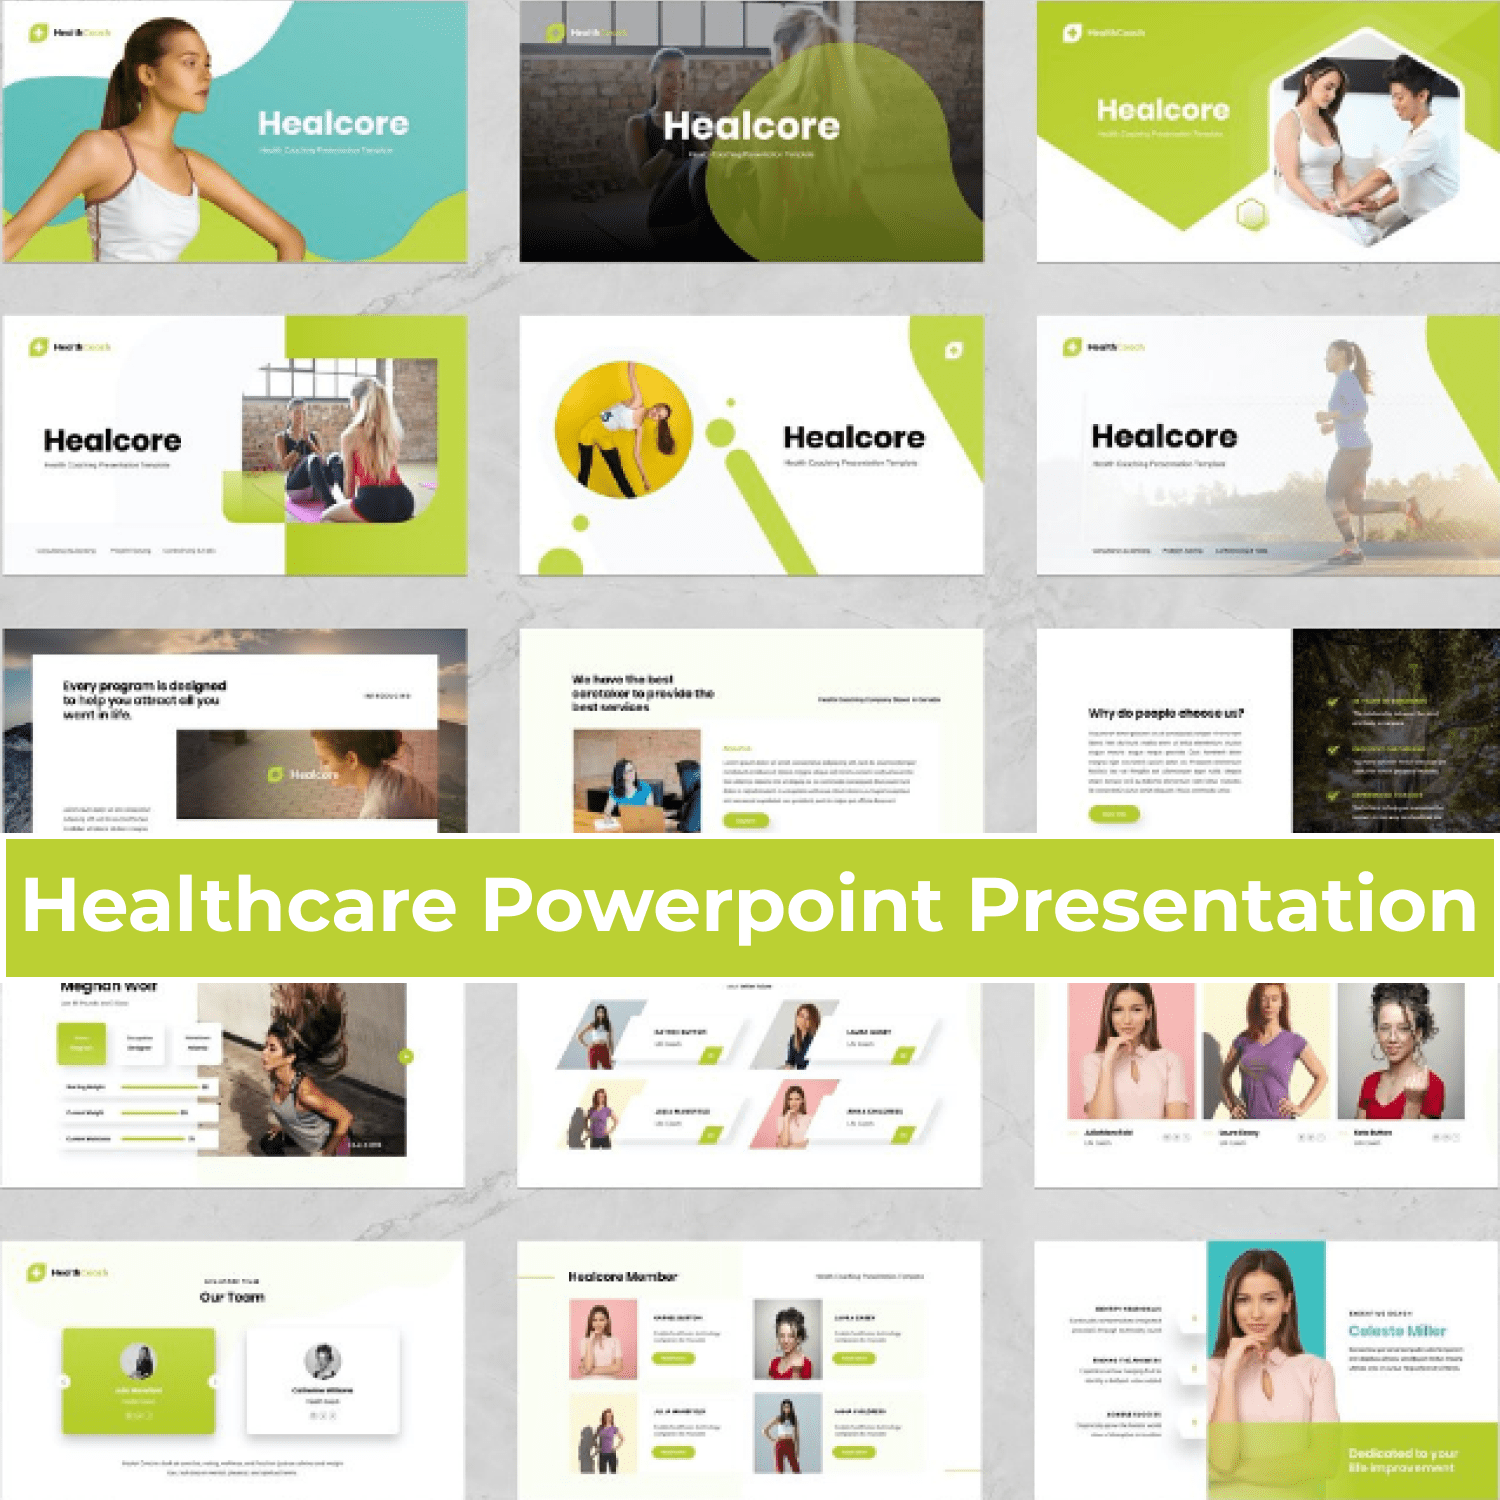 Healthcare Powerpoint Presentation cover image.